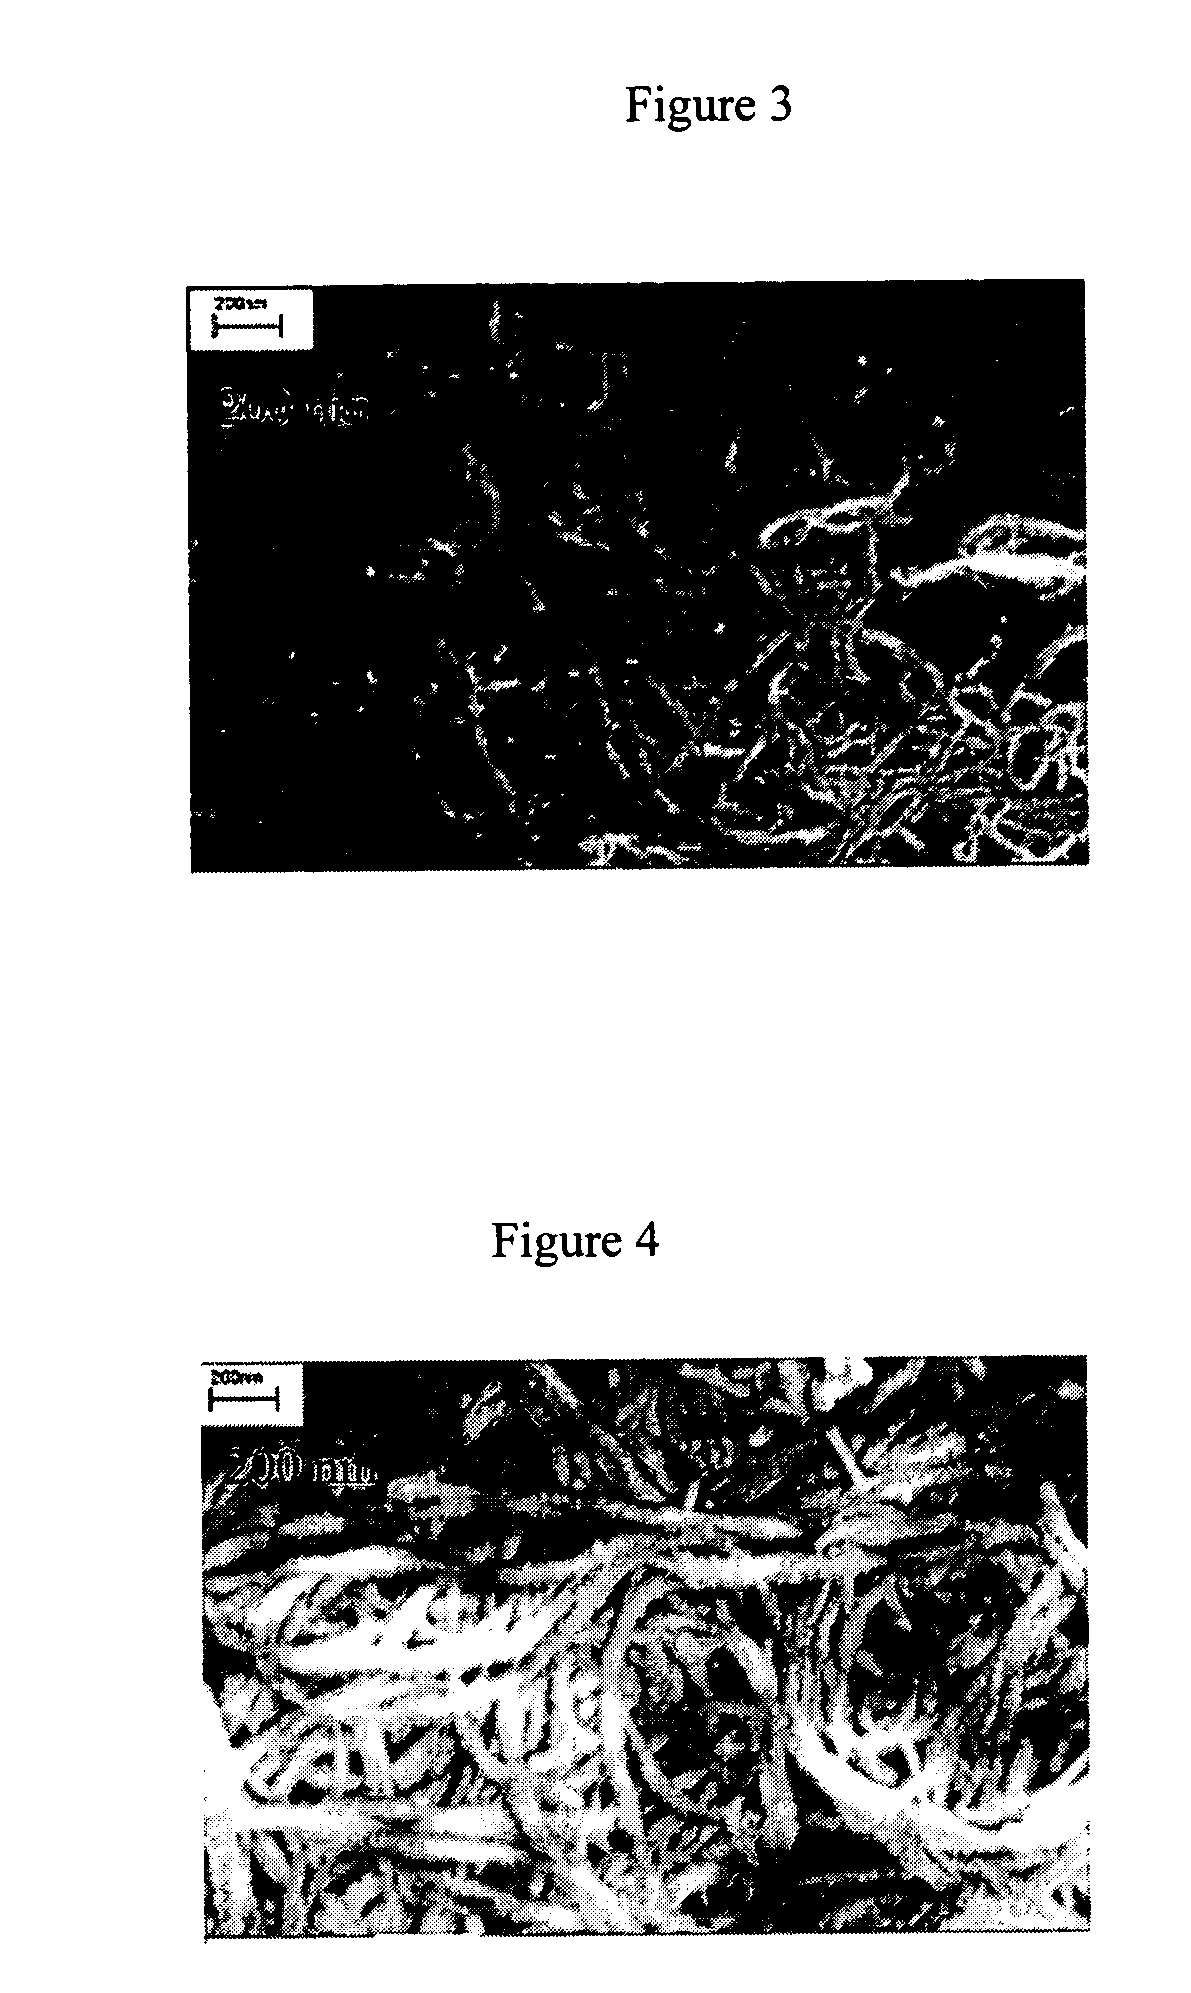 Supercapacitor having electrode material comprising single-wall carbon nanotubes and process for making the same